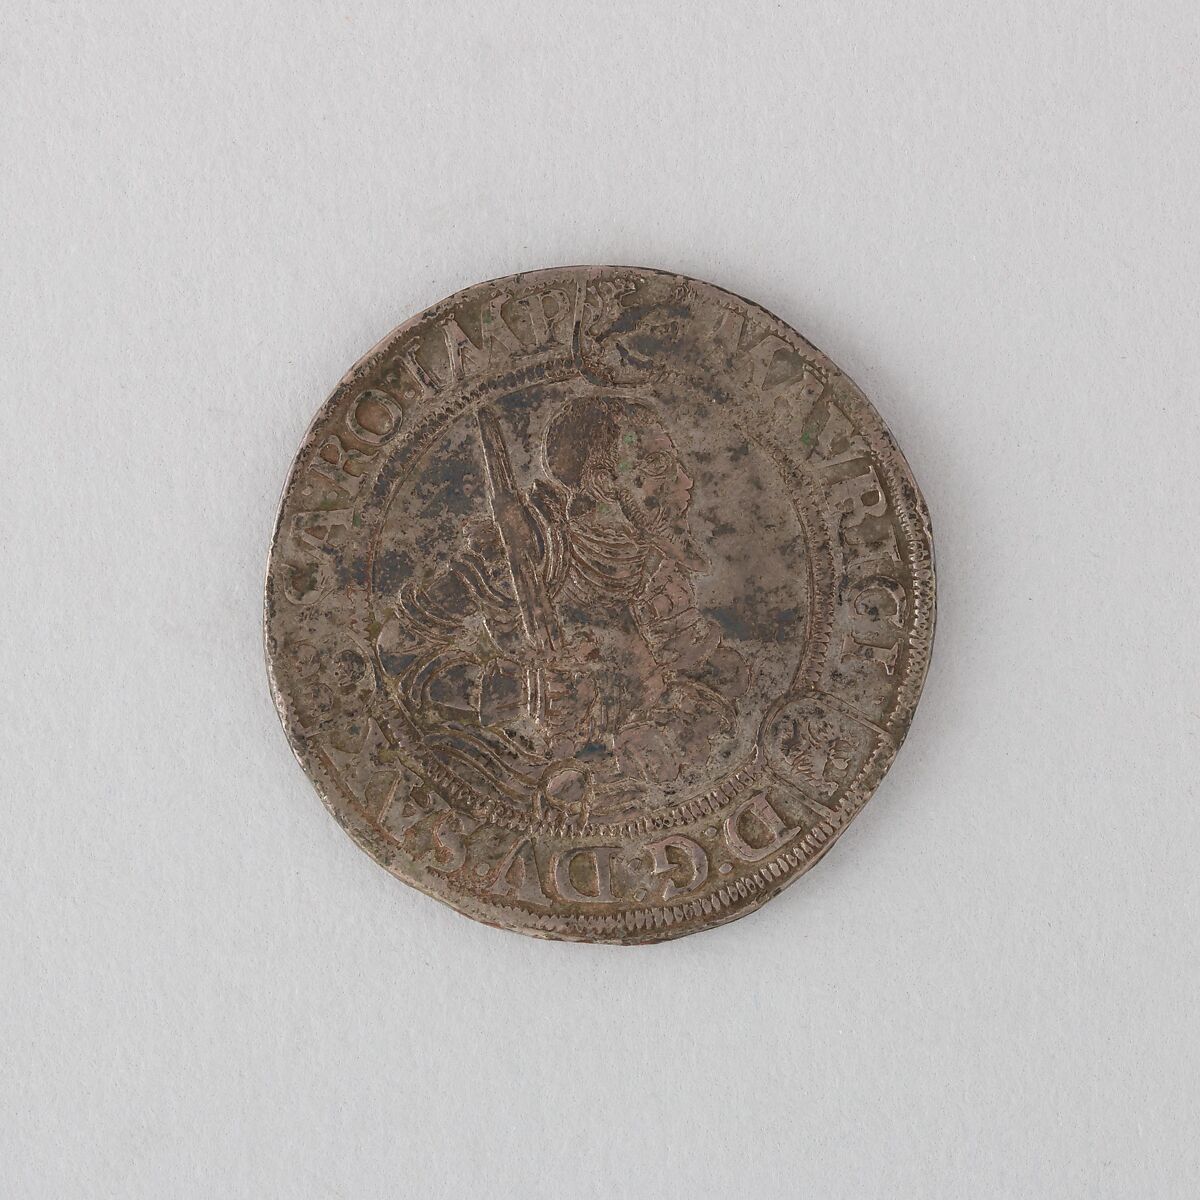 Coin (Thaler, Annaberg) Showing Maurice, Duke and Elector of Saxony, Silver, German 